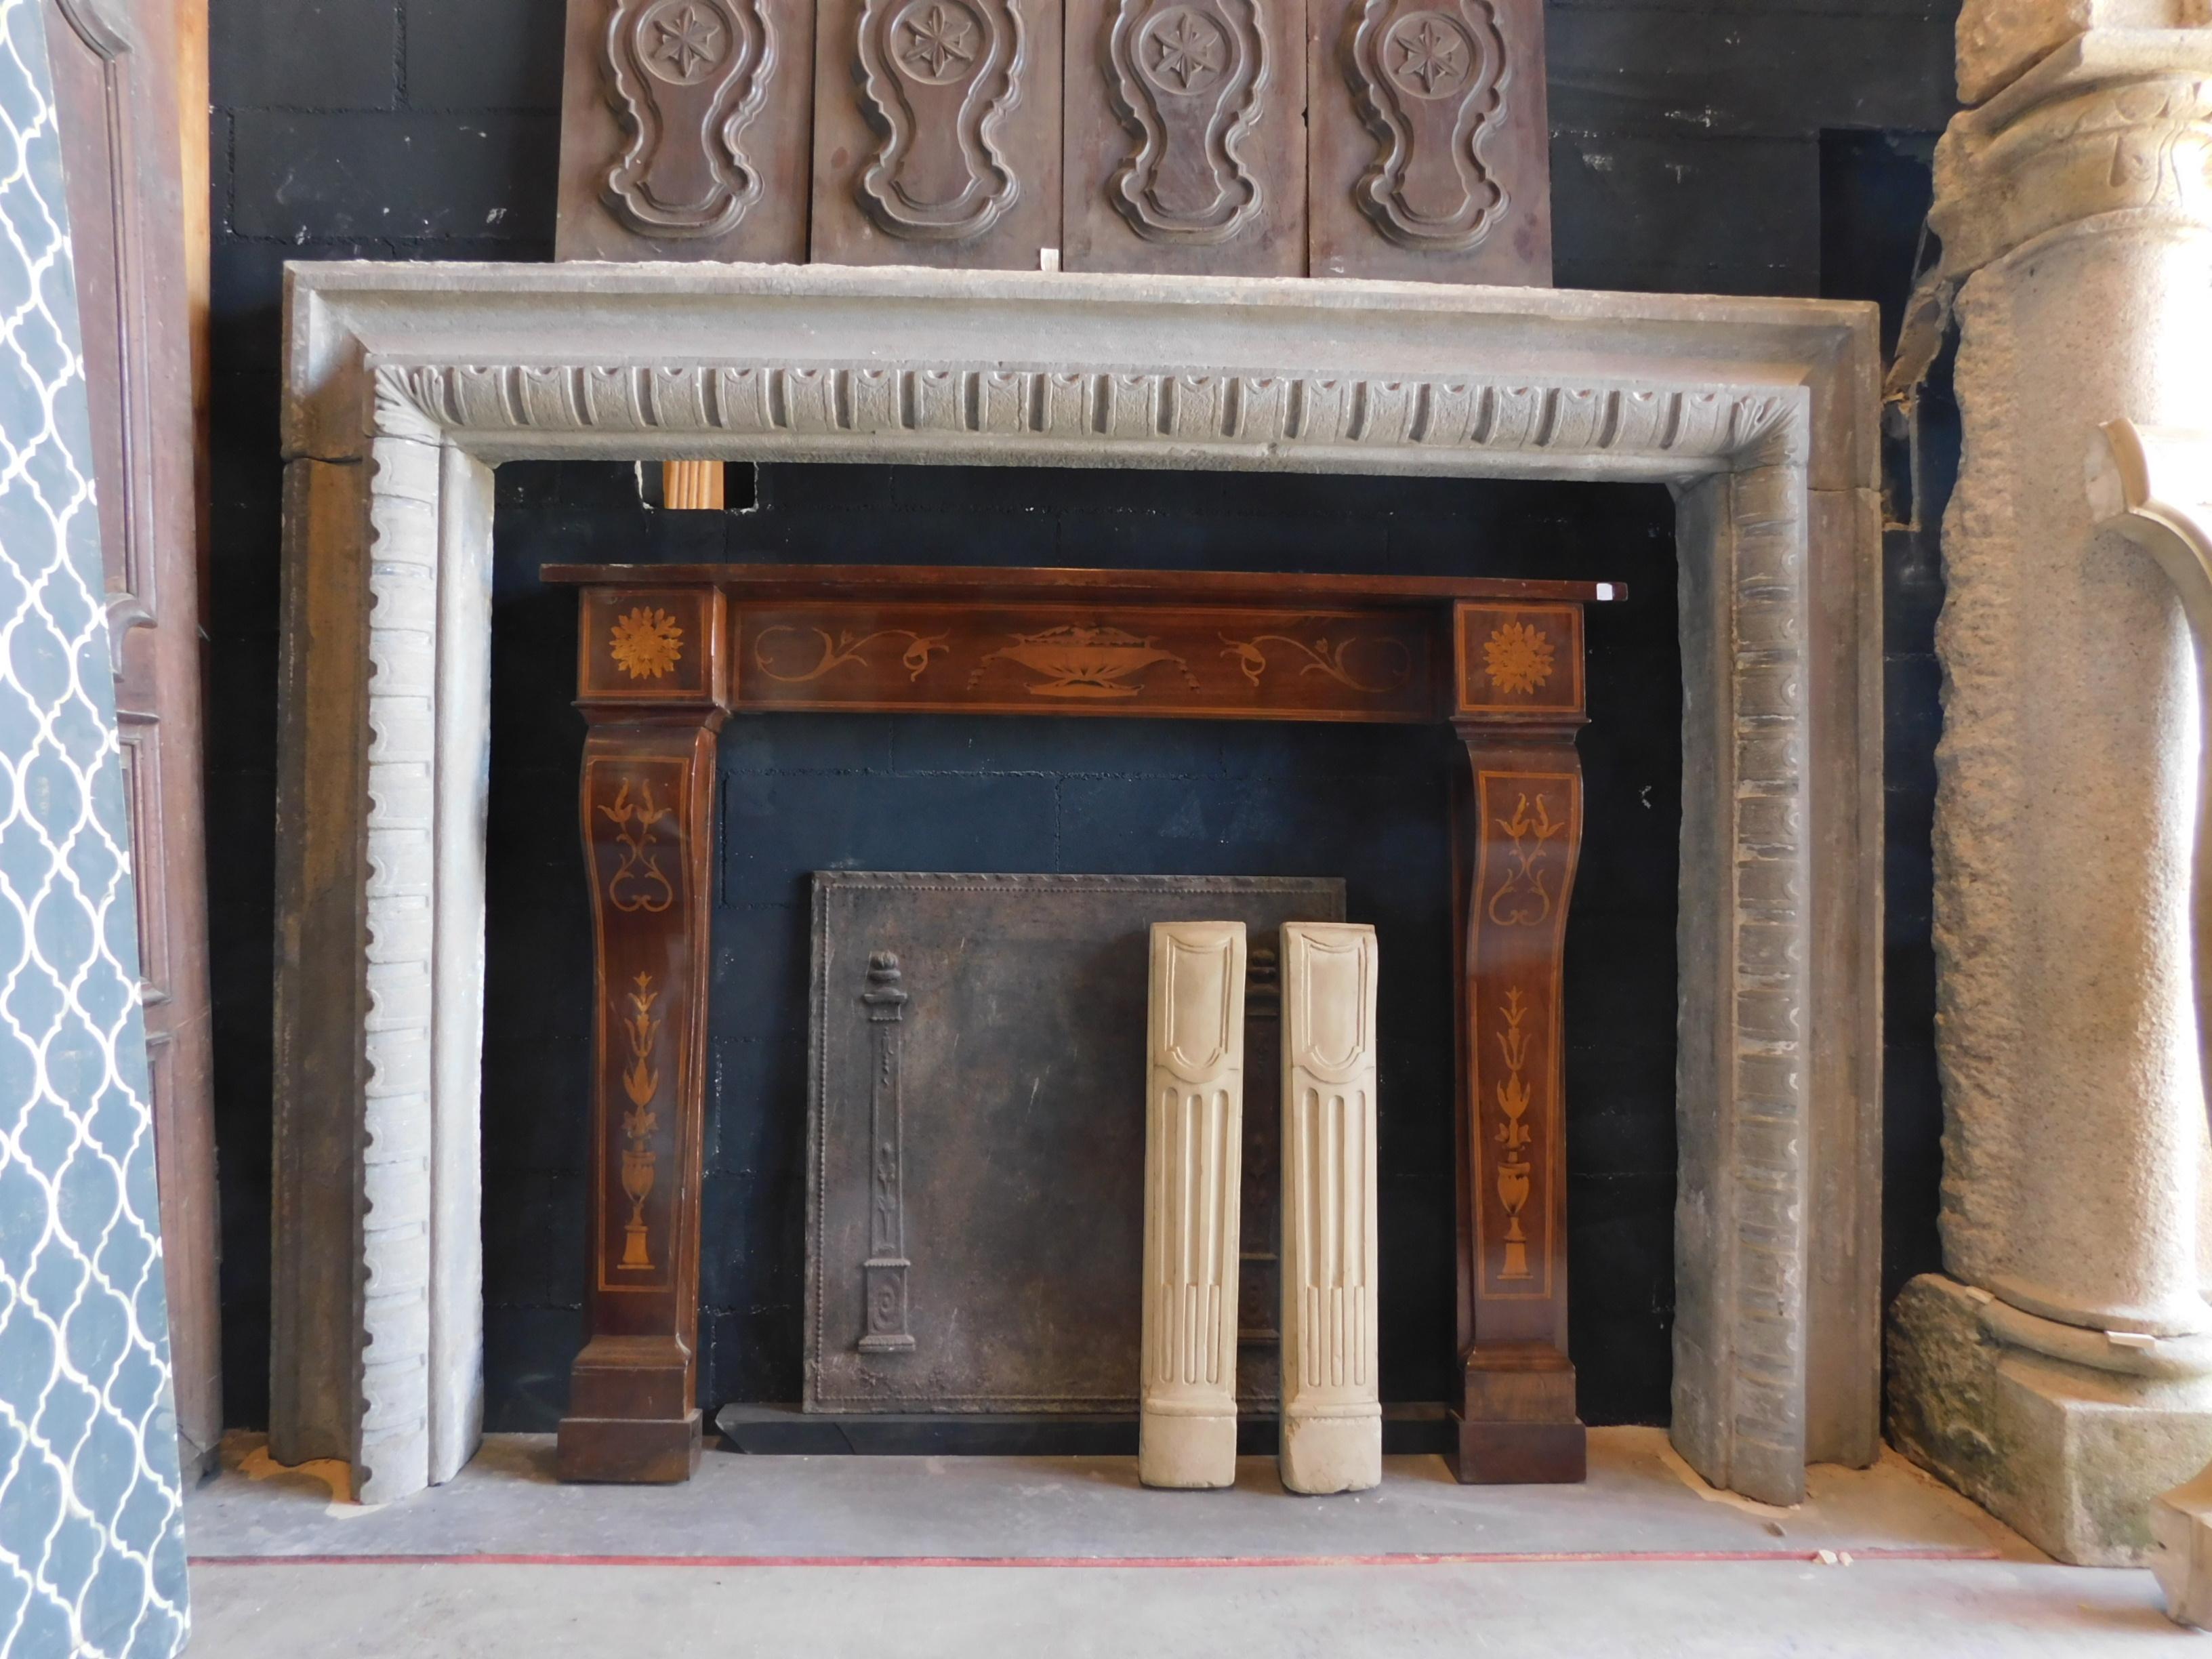 Antique Salvator Rosa fireplace in Serena stone, gray stone, hand-carved with Classic frame and teeth, classic fireplace frame that can be very appreciated even a modern interior given the geometric shape, original and sculpted from the 17th century